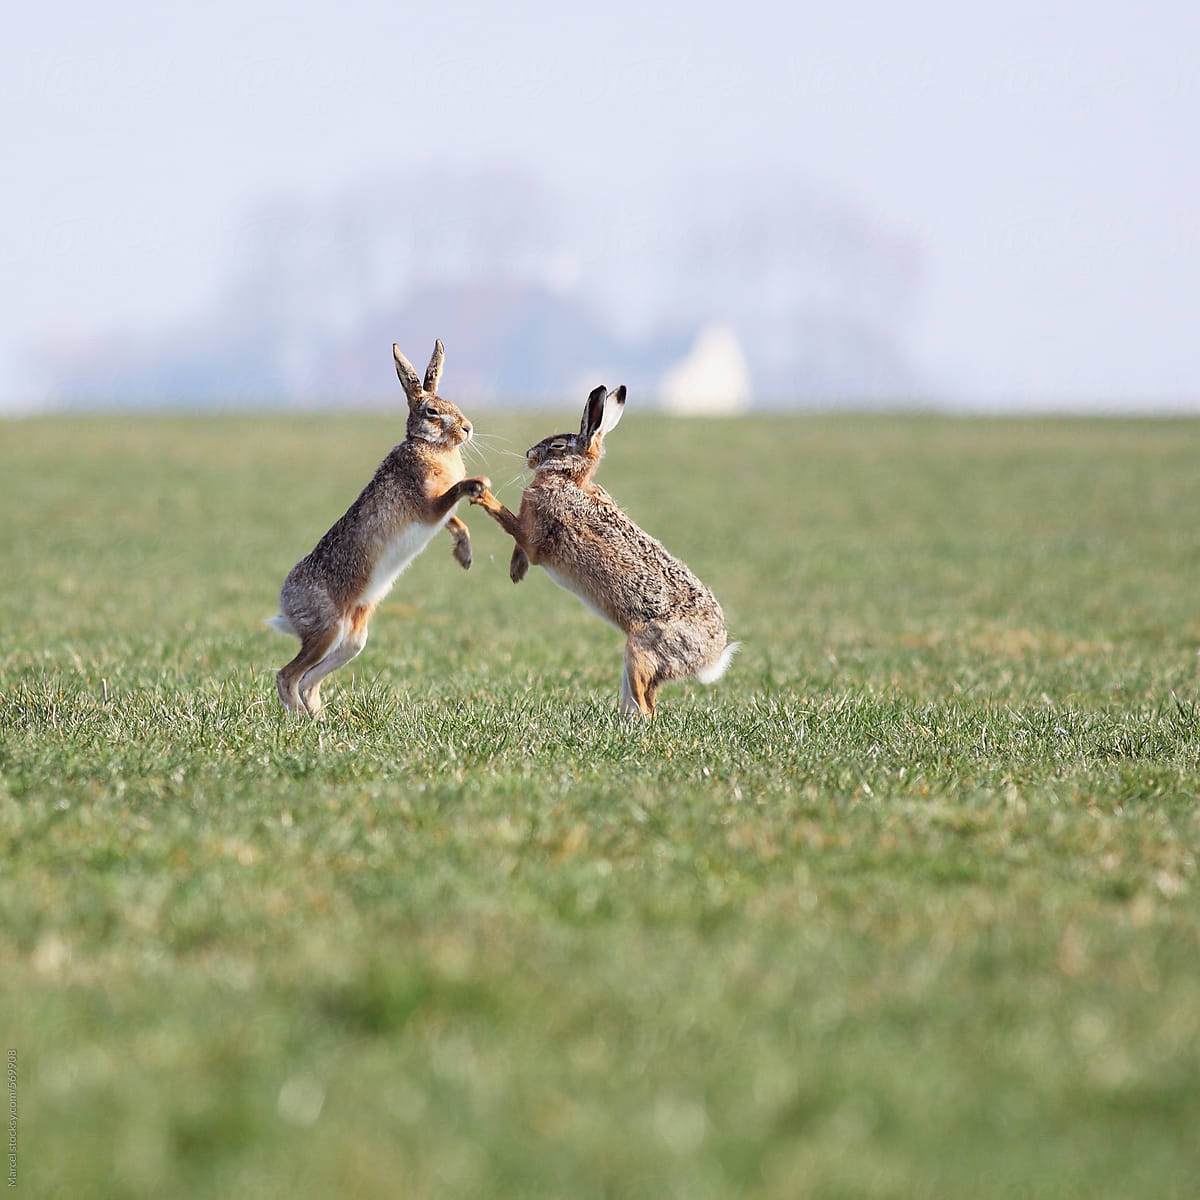 Two hares appear to be highfiving, while having a boxing match in a field